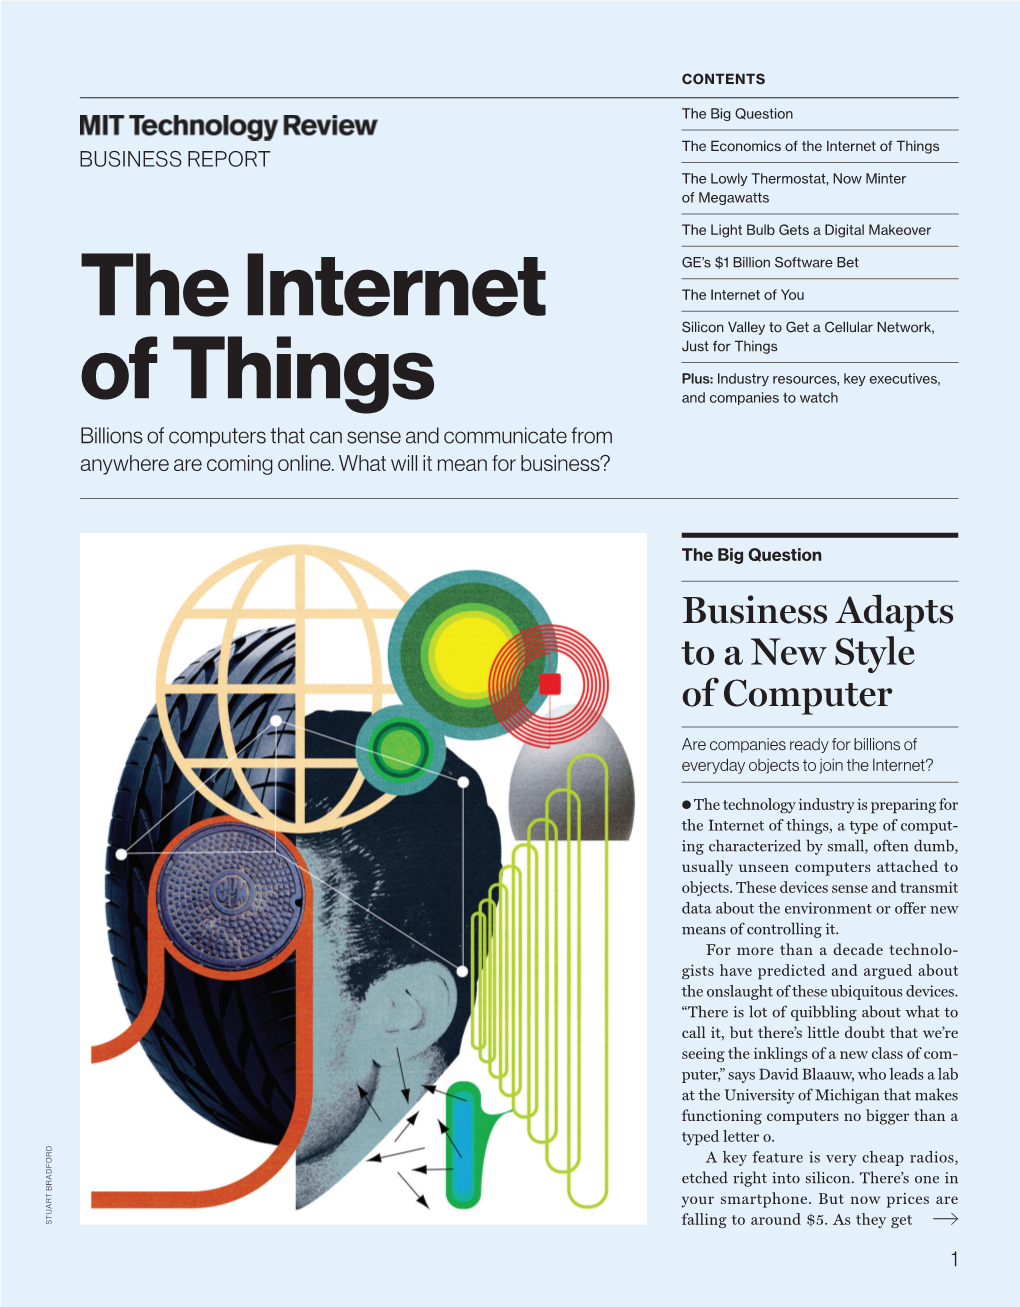 The Internet of Things BUSINESS REPORT the Lowly Thermostat, Now Minter of Megawatts